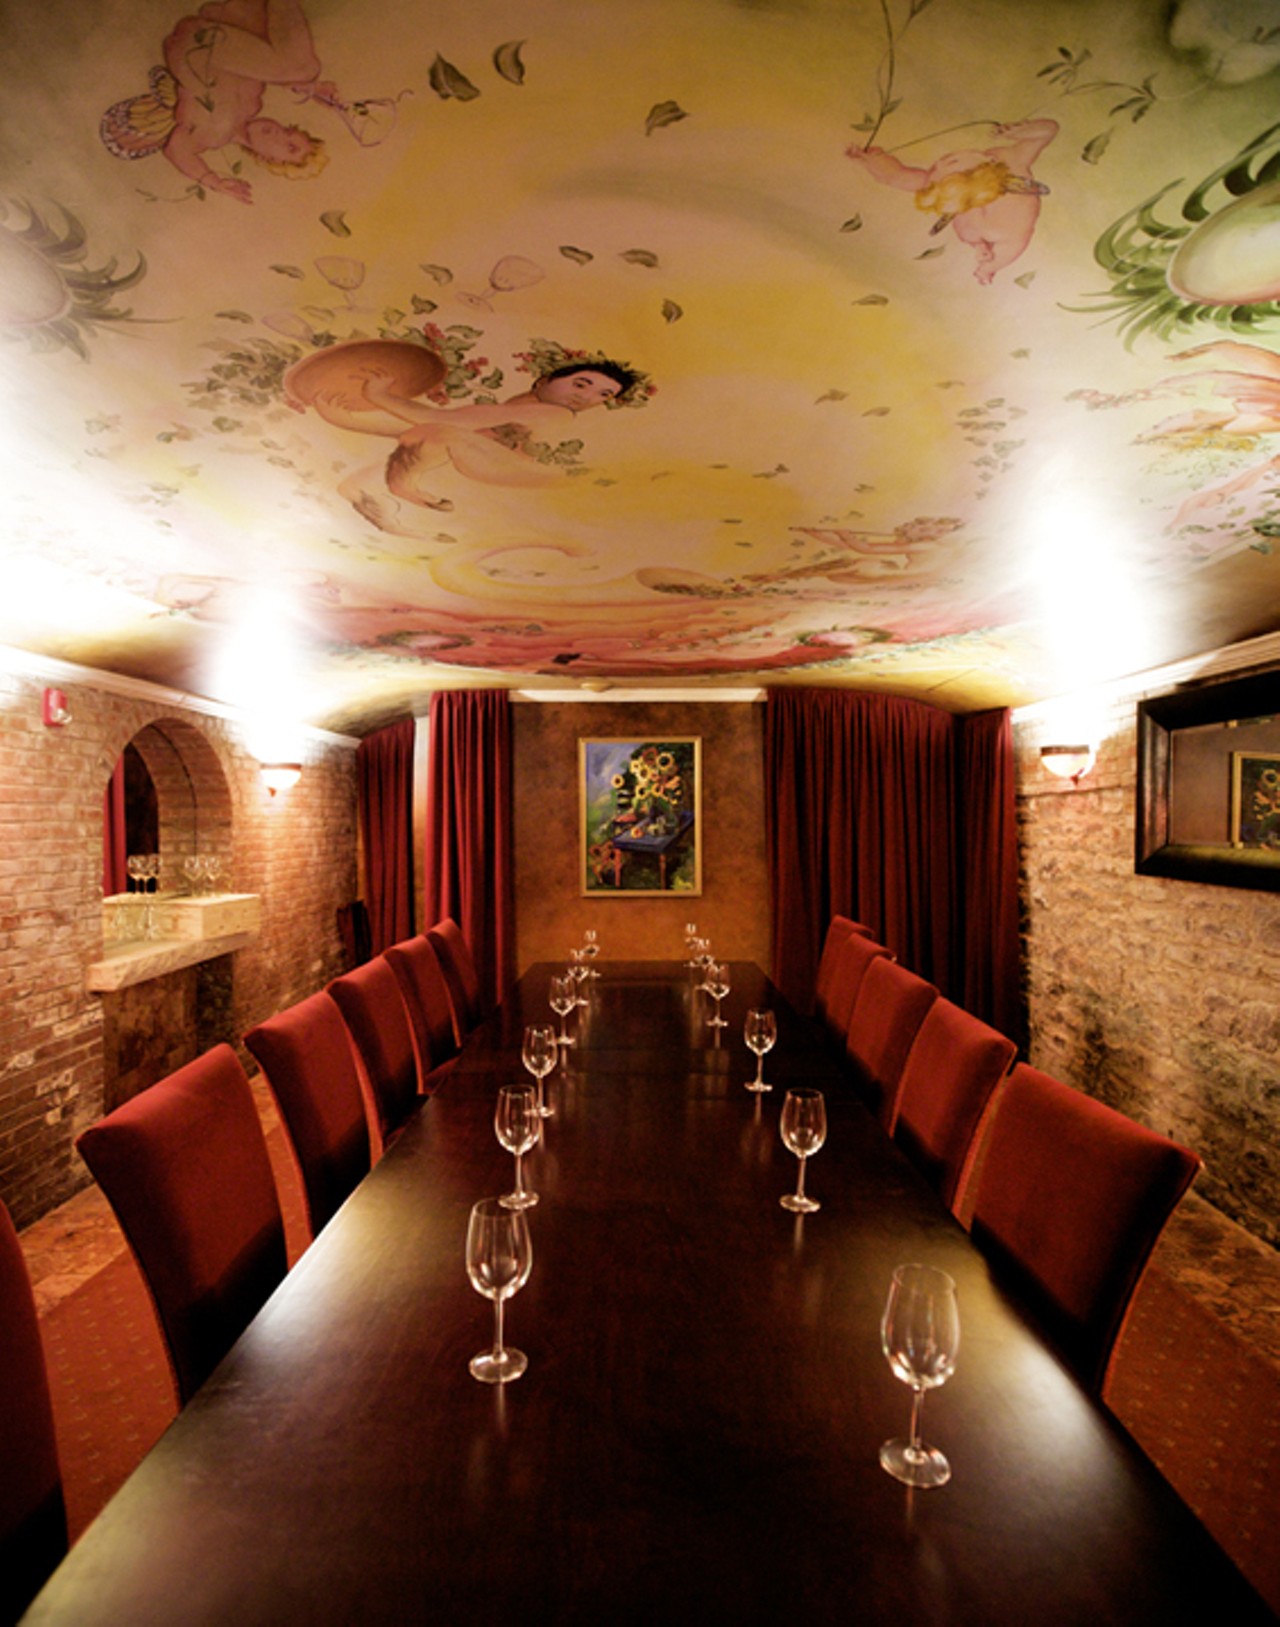 Downstairs, the wine cellar room has one large table. Used mostly for reserved or private functions.